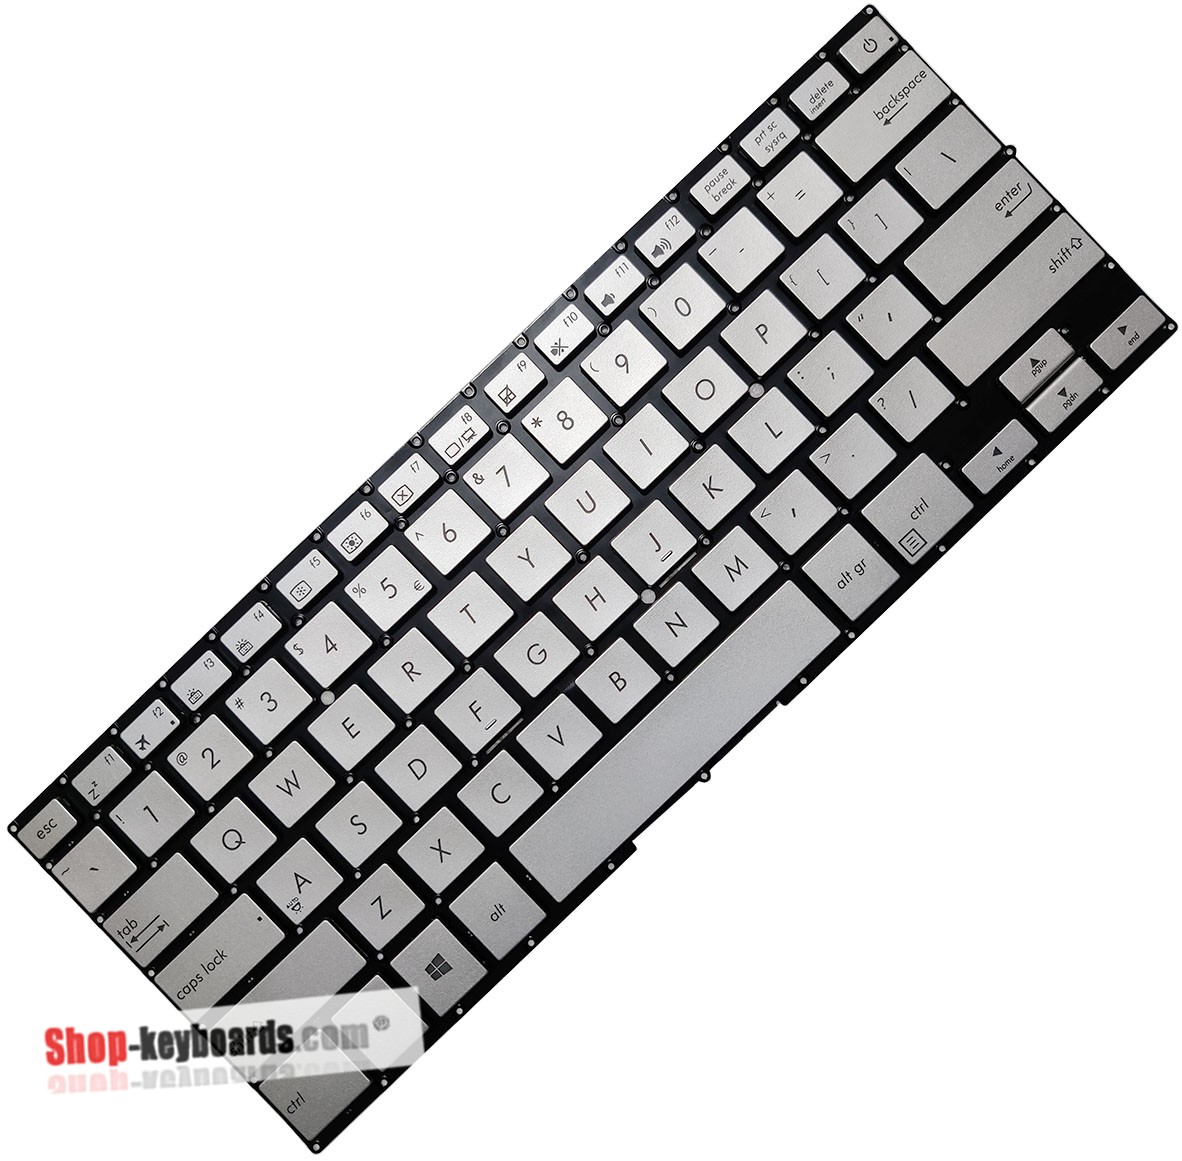 Asus 0KNB0-D620BE00 Keyboard replacement